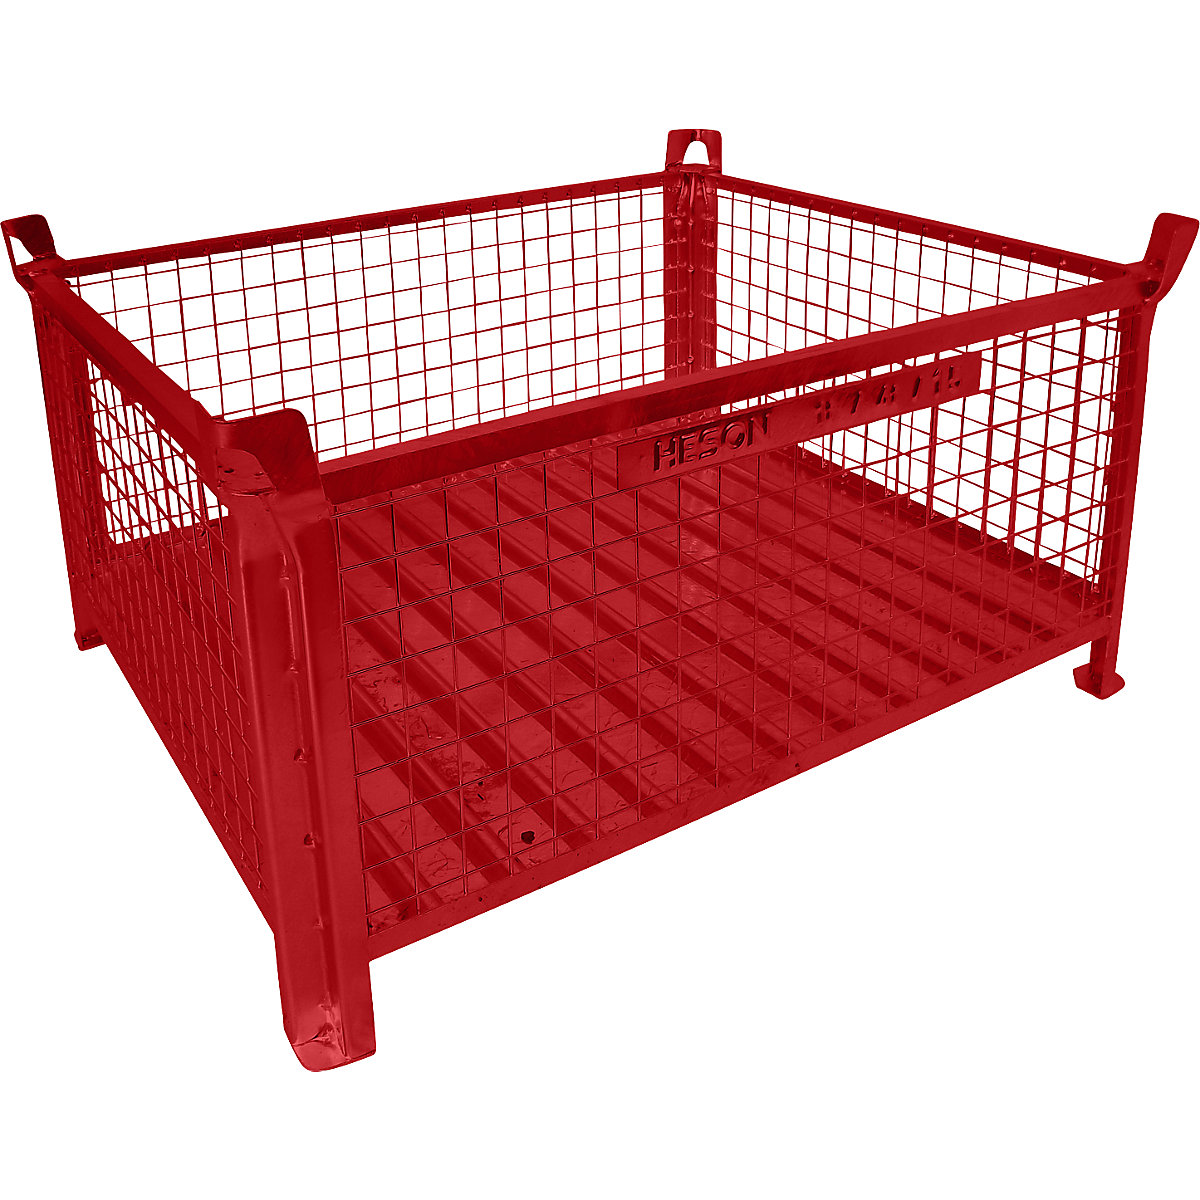 Box pallet with sheet steel base – Heson, LxW 1200 x 1000 mm, painted red, 5+ items-6